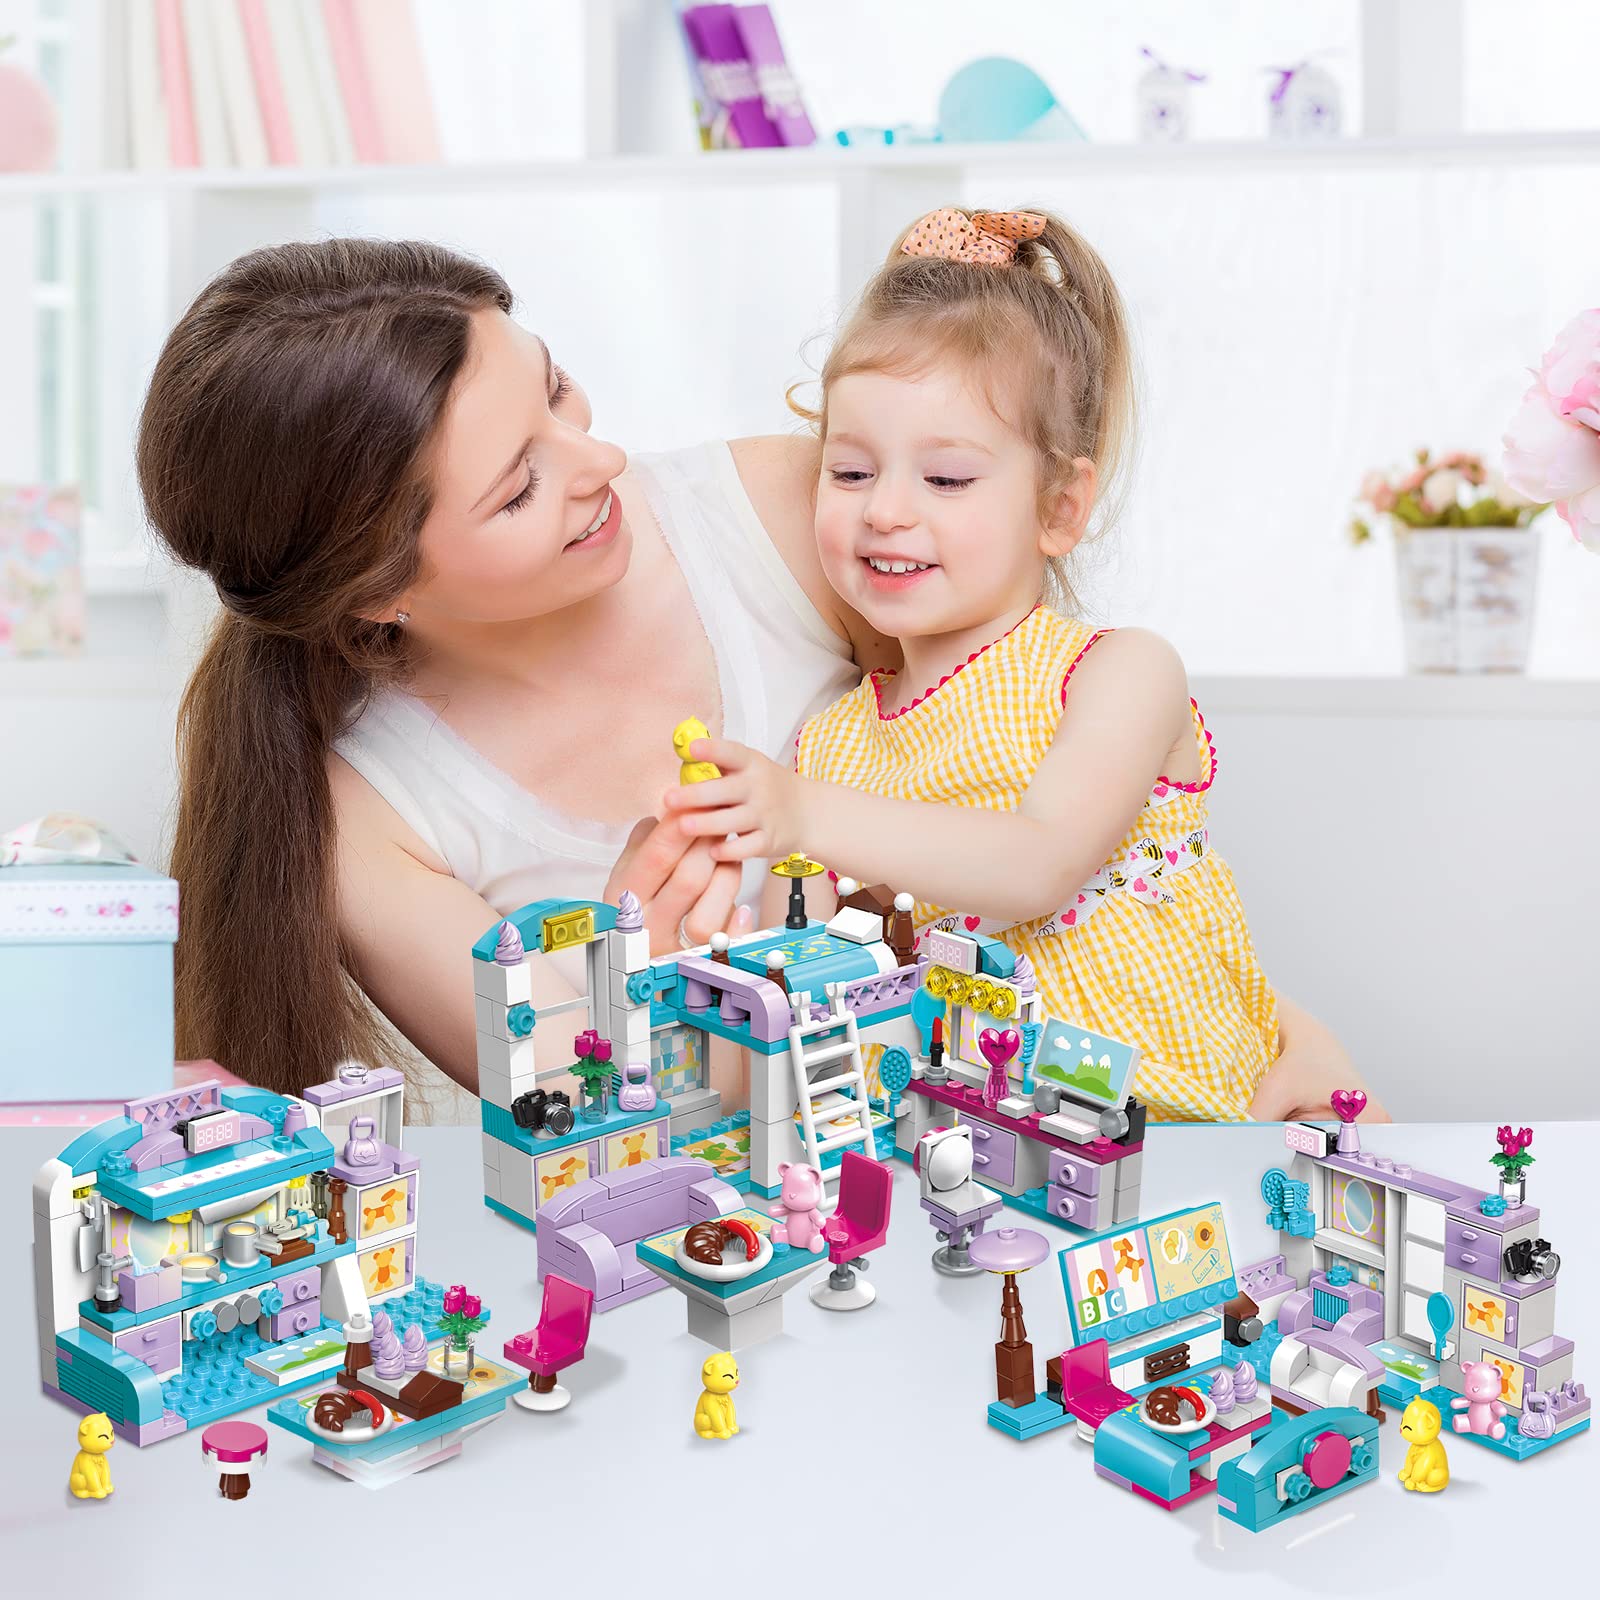 Mov stone 3 in 1 Dream Home Friends Building Sets for Girls 6-12,Creative 194 Pieces Friends Play House Educational Bricks DIY Toys Christmas Birthday Gift for Kids Age 6 7 8 10 11 12